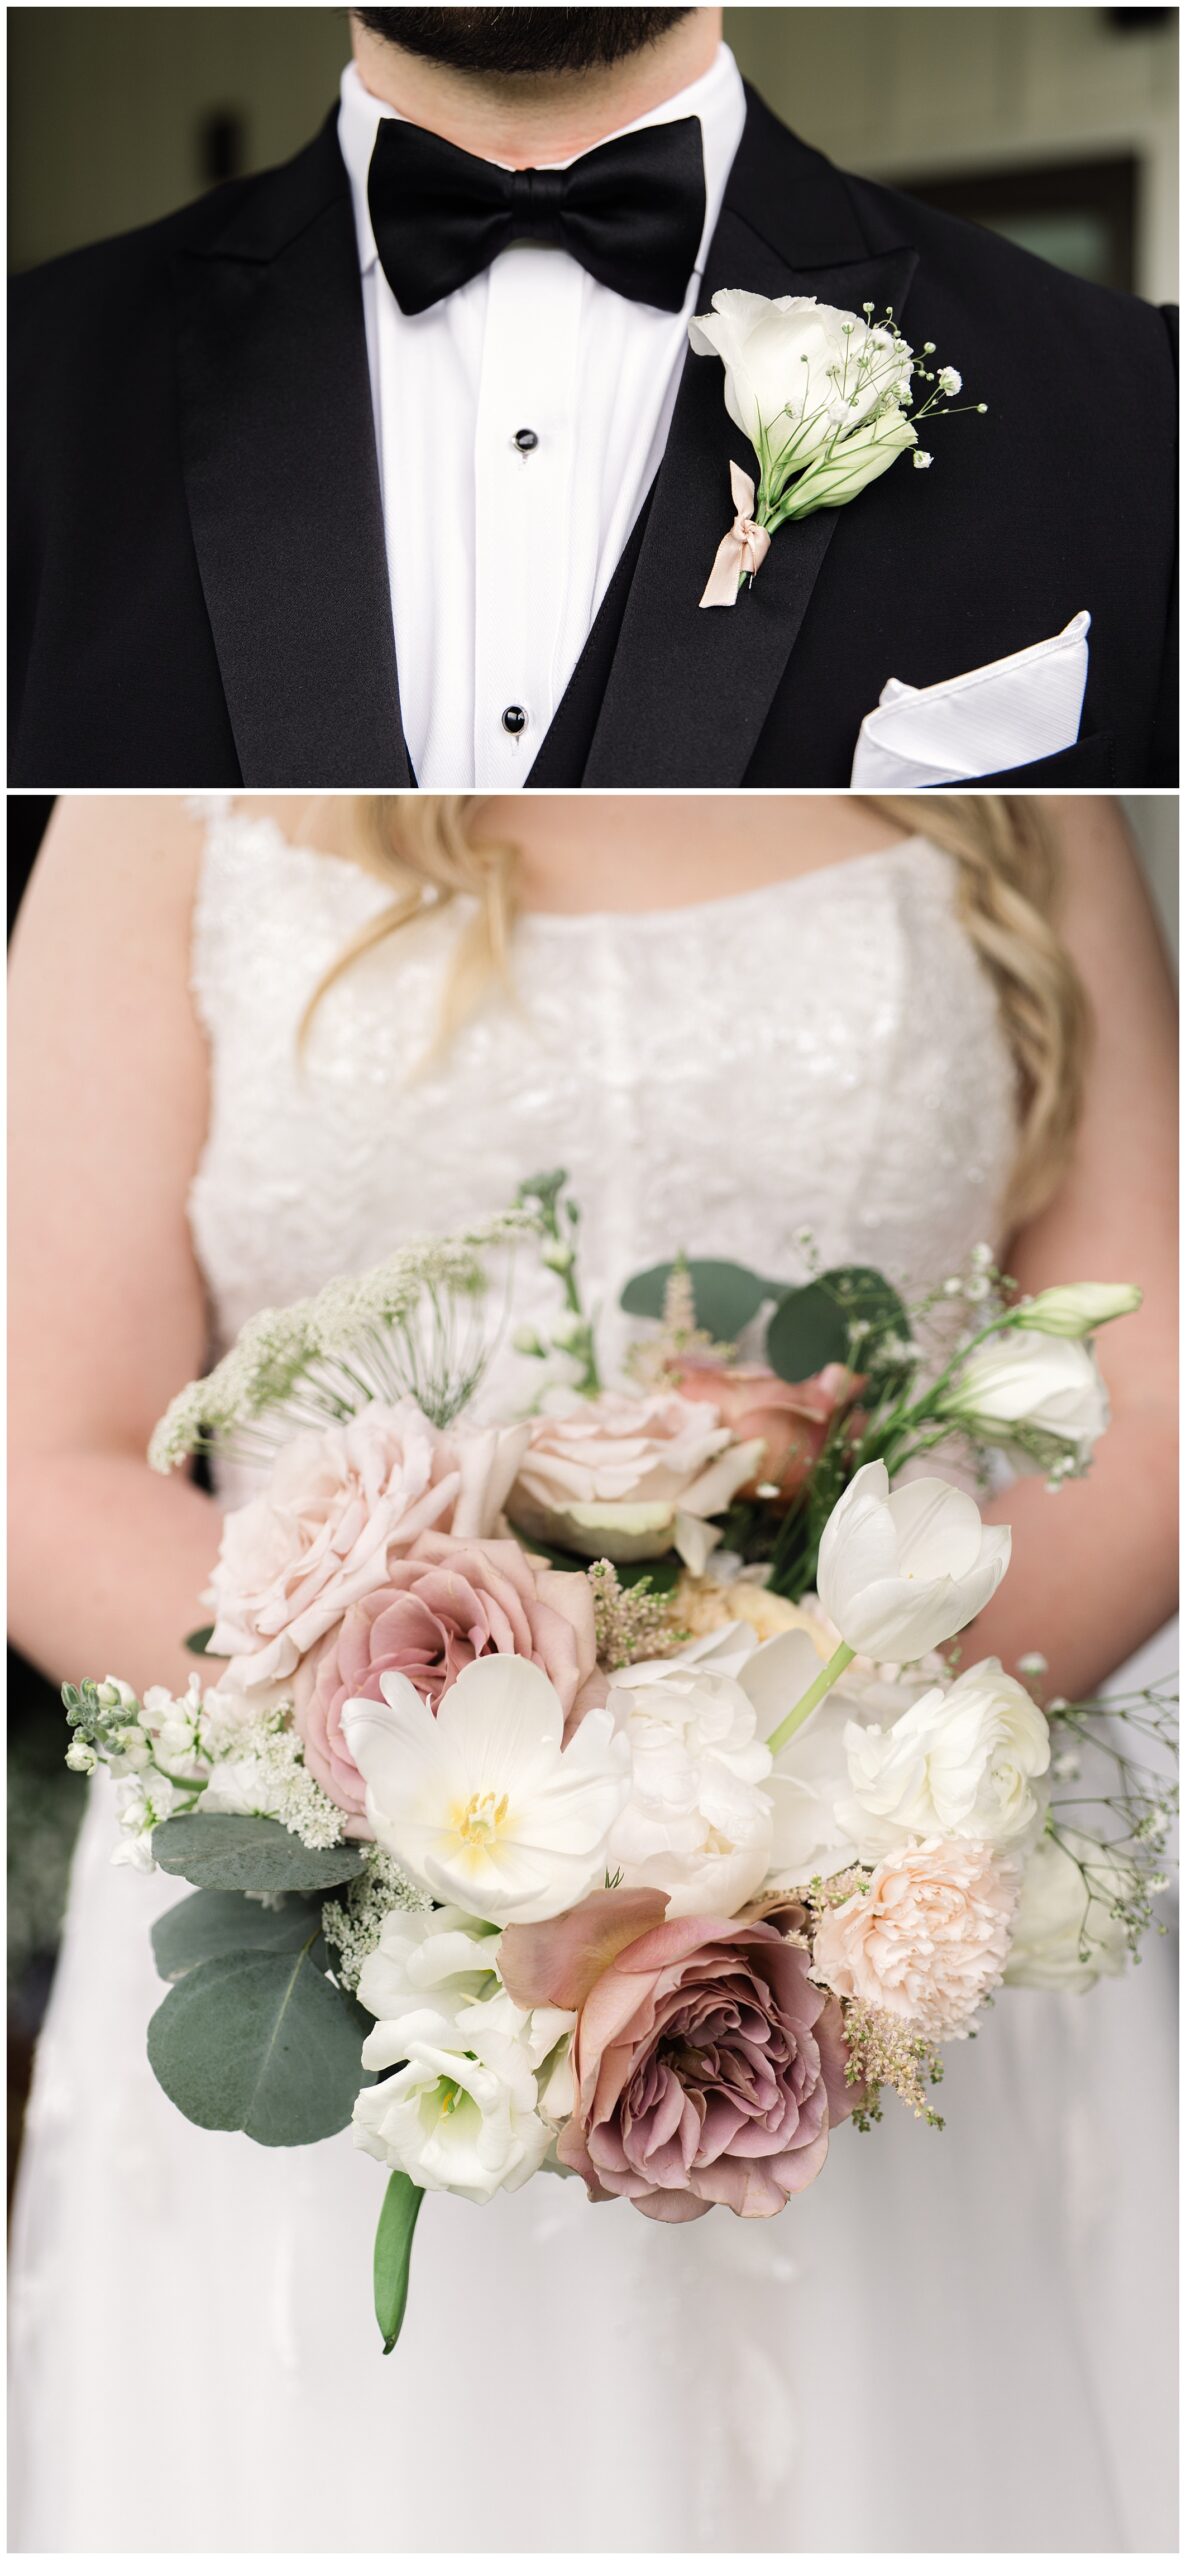 Close-up of a groom in a black tuxedo with a boutonniere and a bride in a white gown holding a bouquet of soft pink and white flowers at Chestnut Ridge.